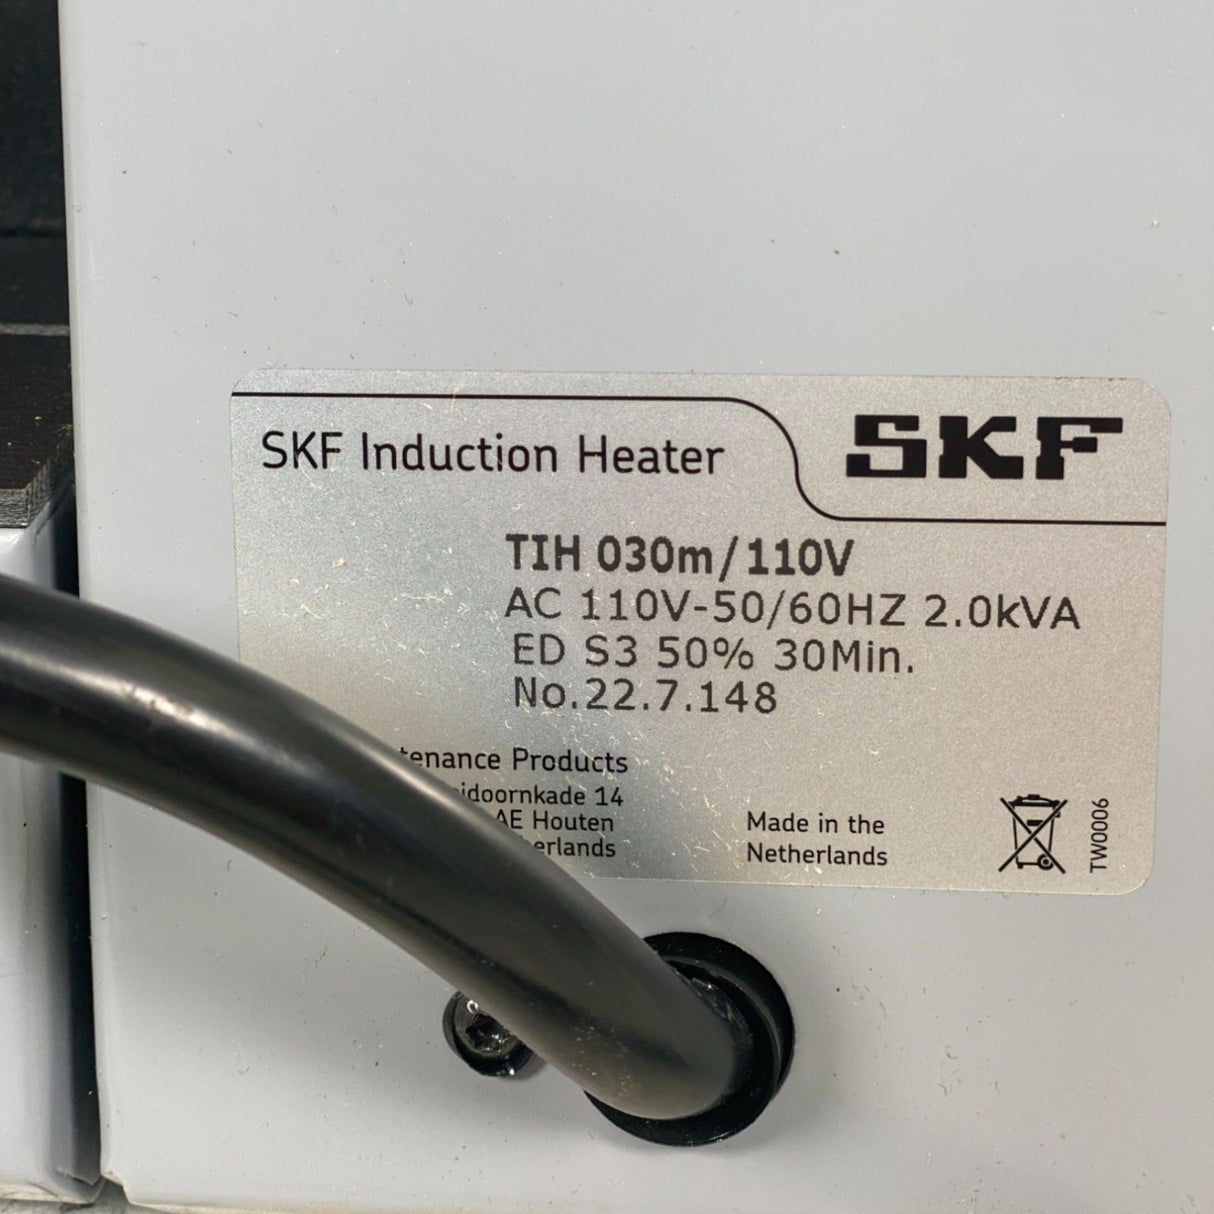 TIH030M/110V Genuine SKF Small Induction Heater 110V - Truck To Trailer